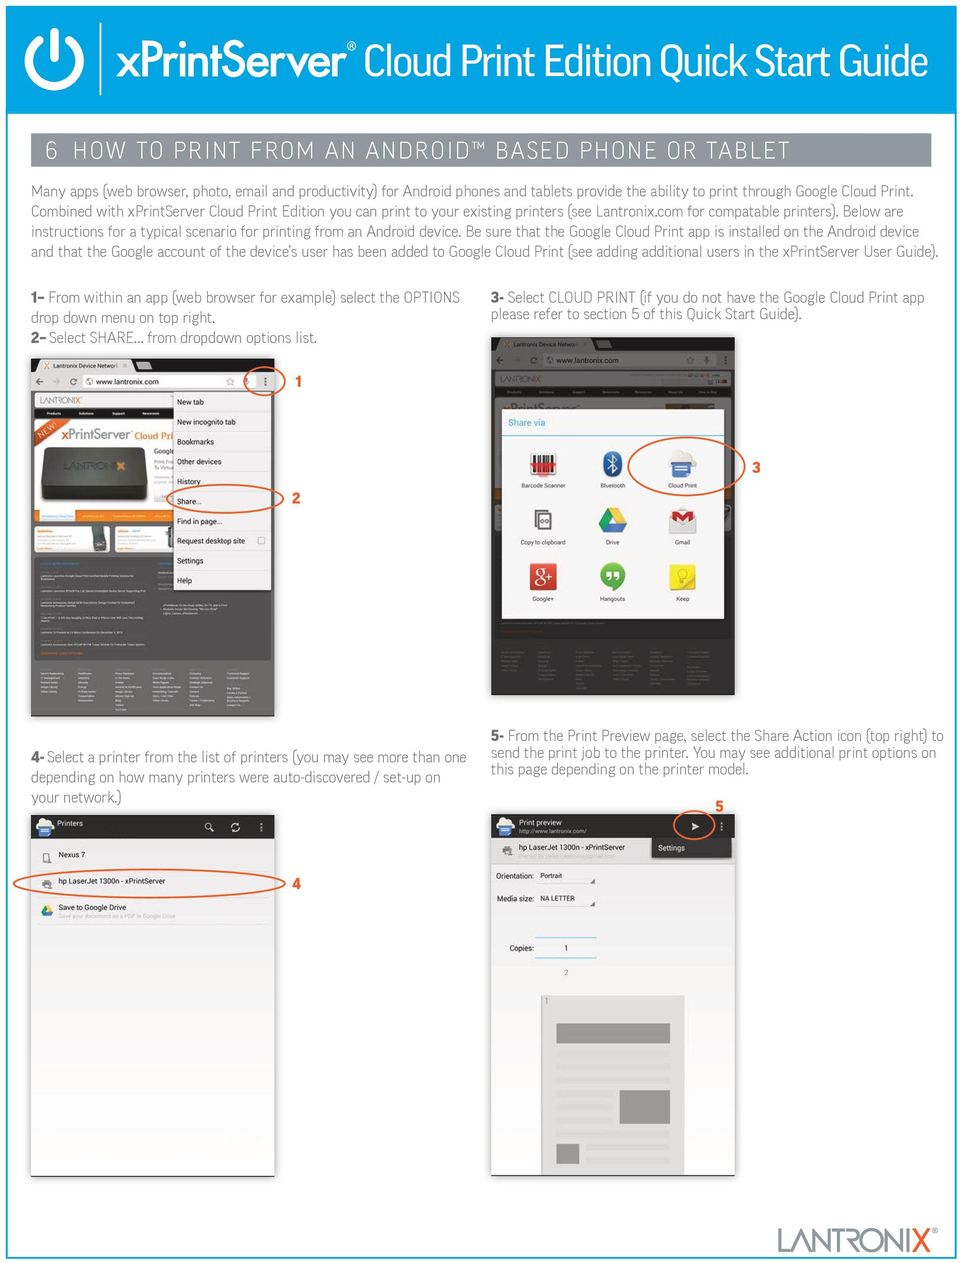 Below are instructions for a typical scenario for printing from an Android device.